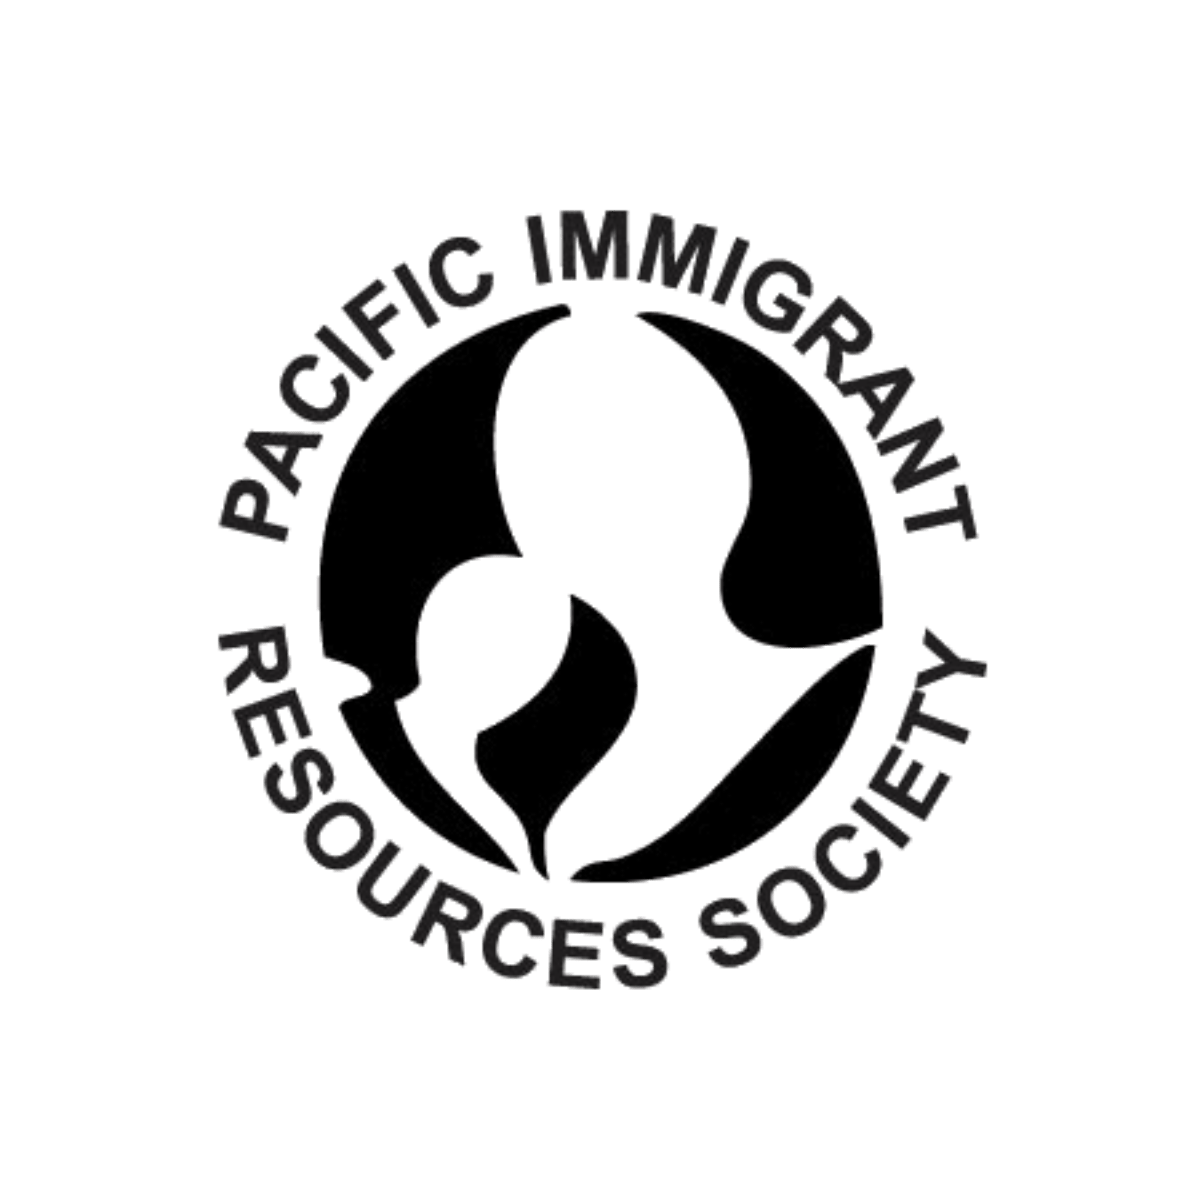 Pacific Immigrant Resources Society (PIRS)